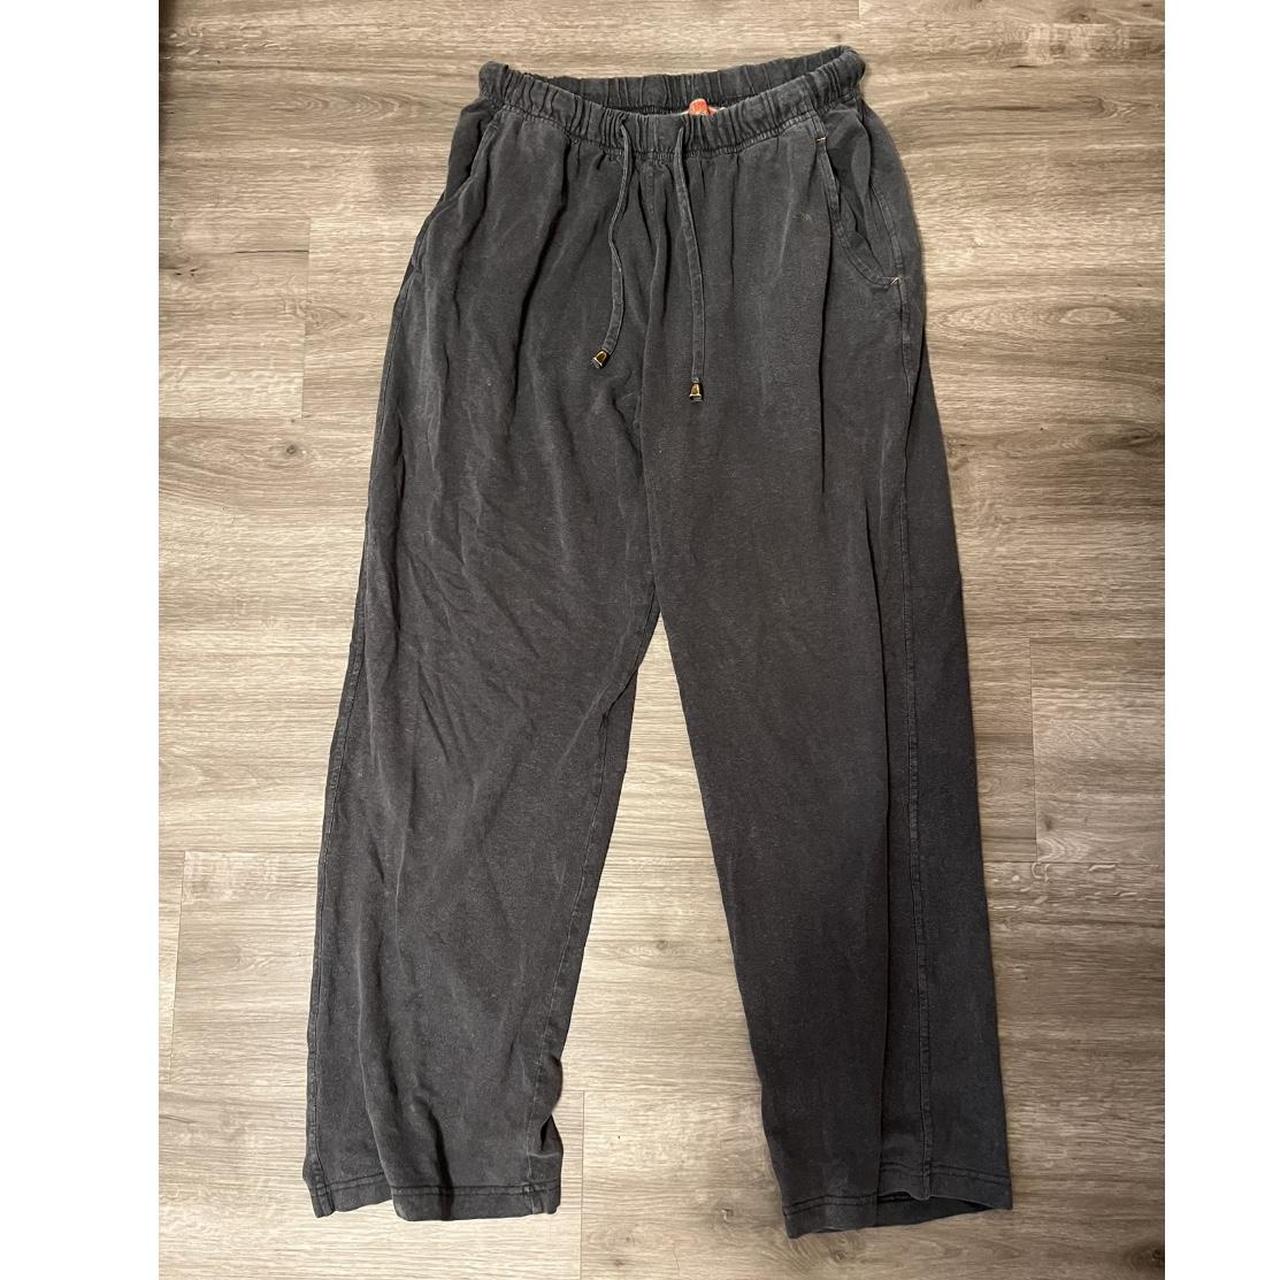 American Vintage Women's Grey and Black Trousers